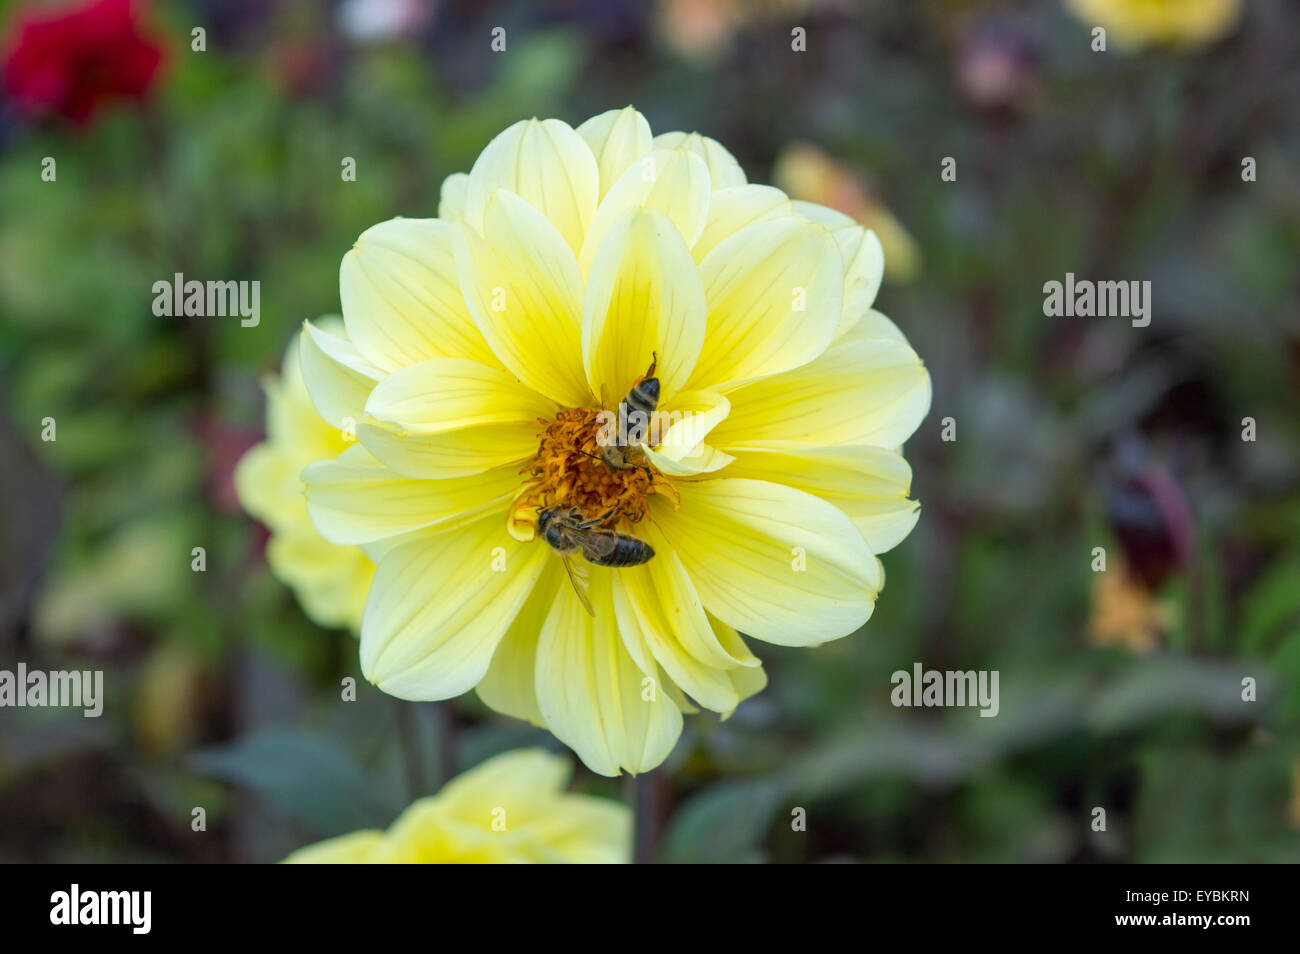 Beautiful yellow flower with a bee collecting nectar Stock Photo